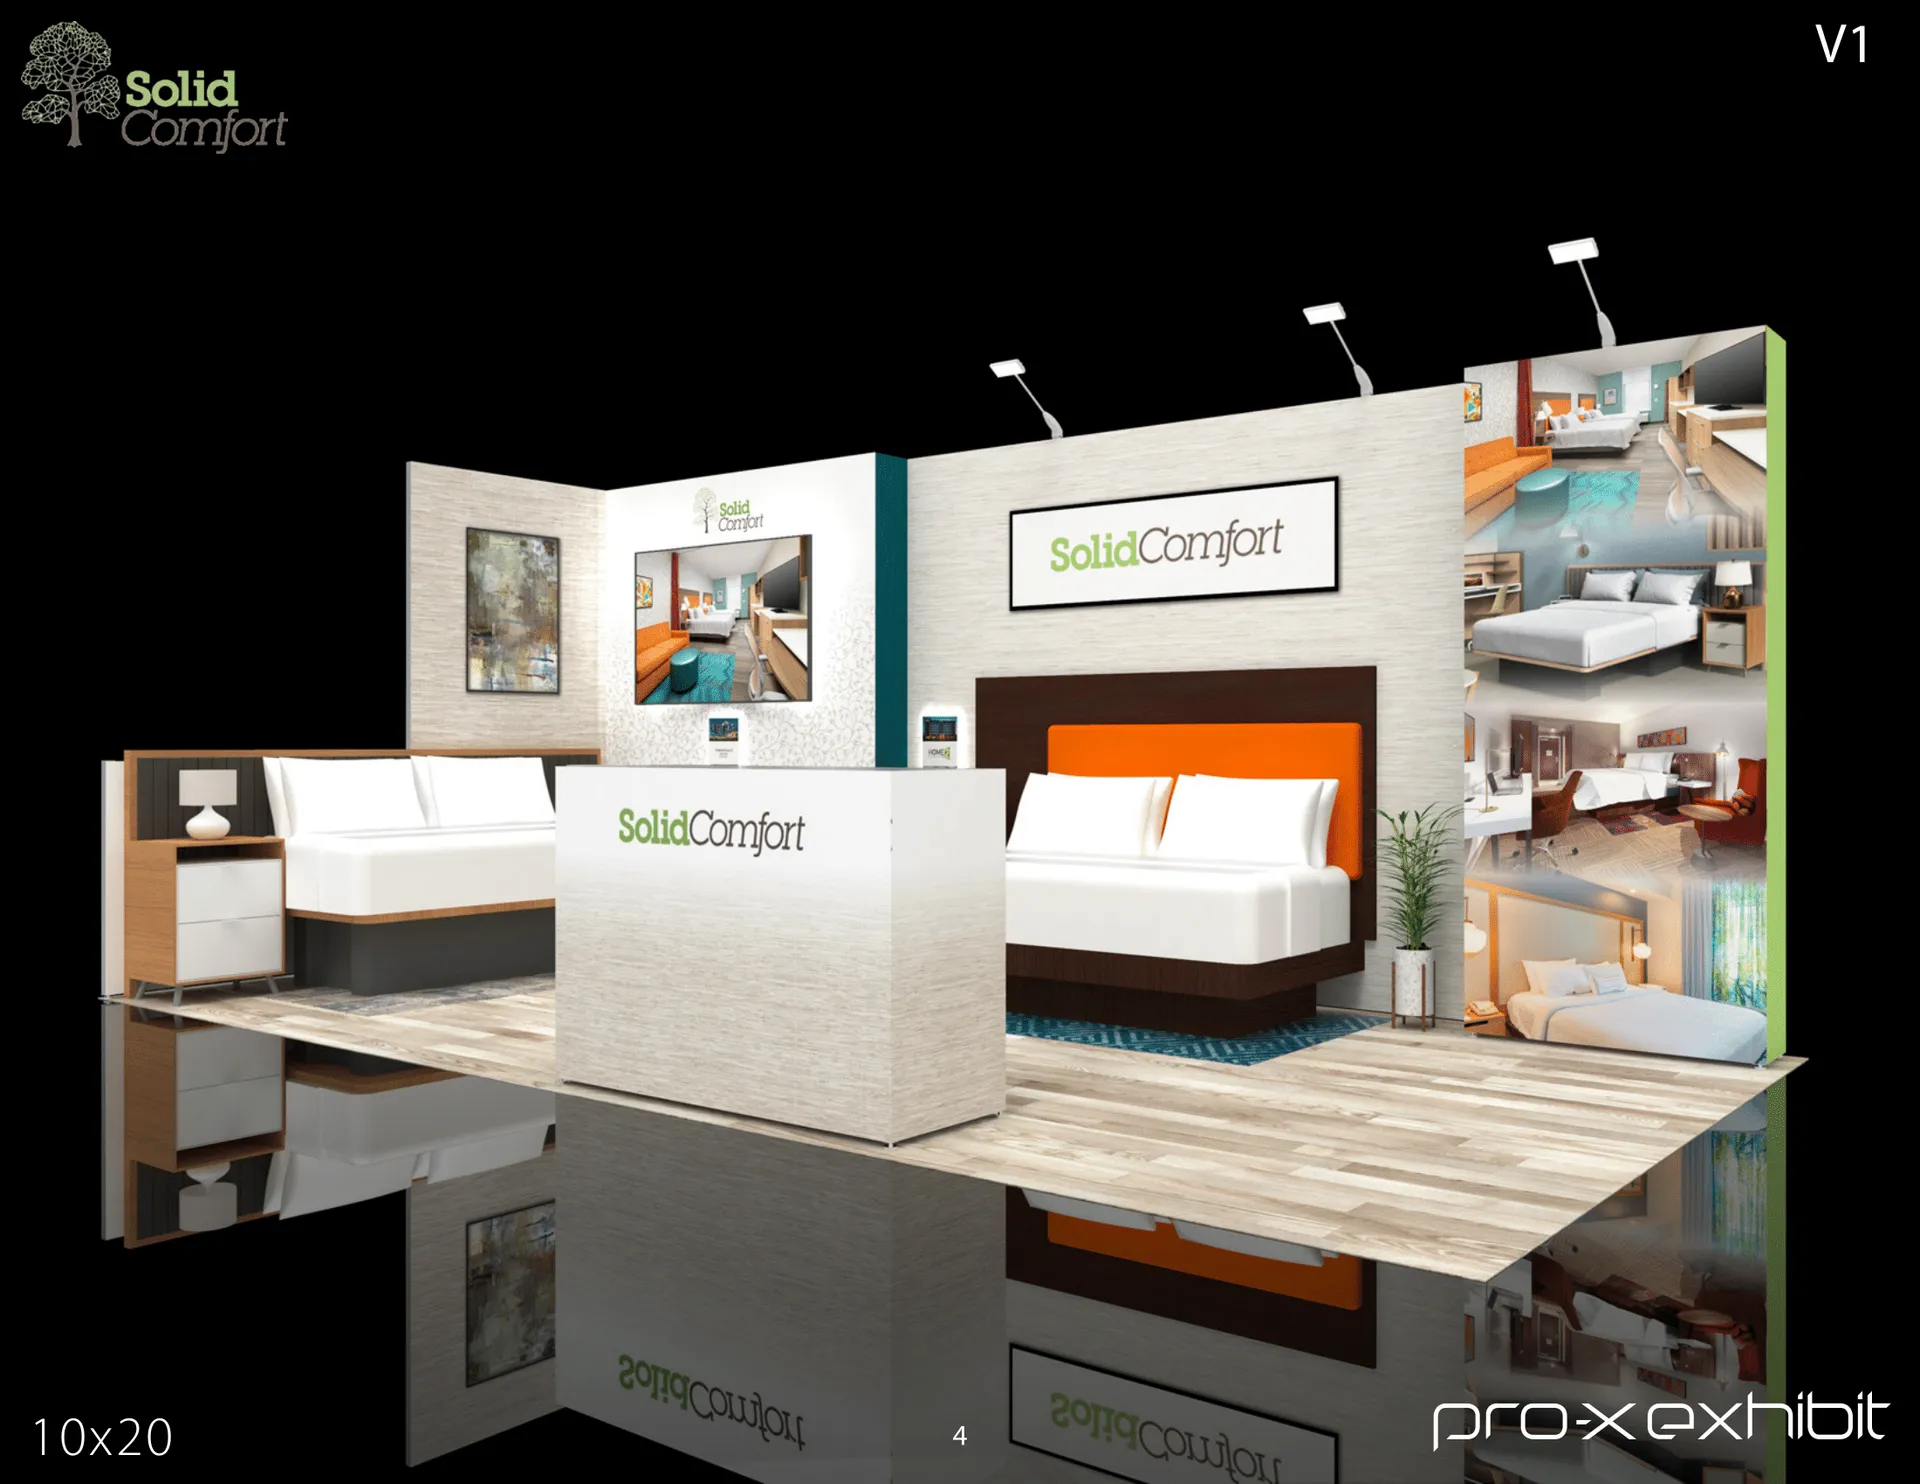 booth-design-projects/Pro-X Exhibits/2024-04-11-10x20-INLINE-Project-4/SOLID_COMFORT_10x20_10x10_BDNY_PRO-X_EXHIBIT_V1-04-jfj6sa.png